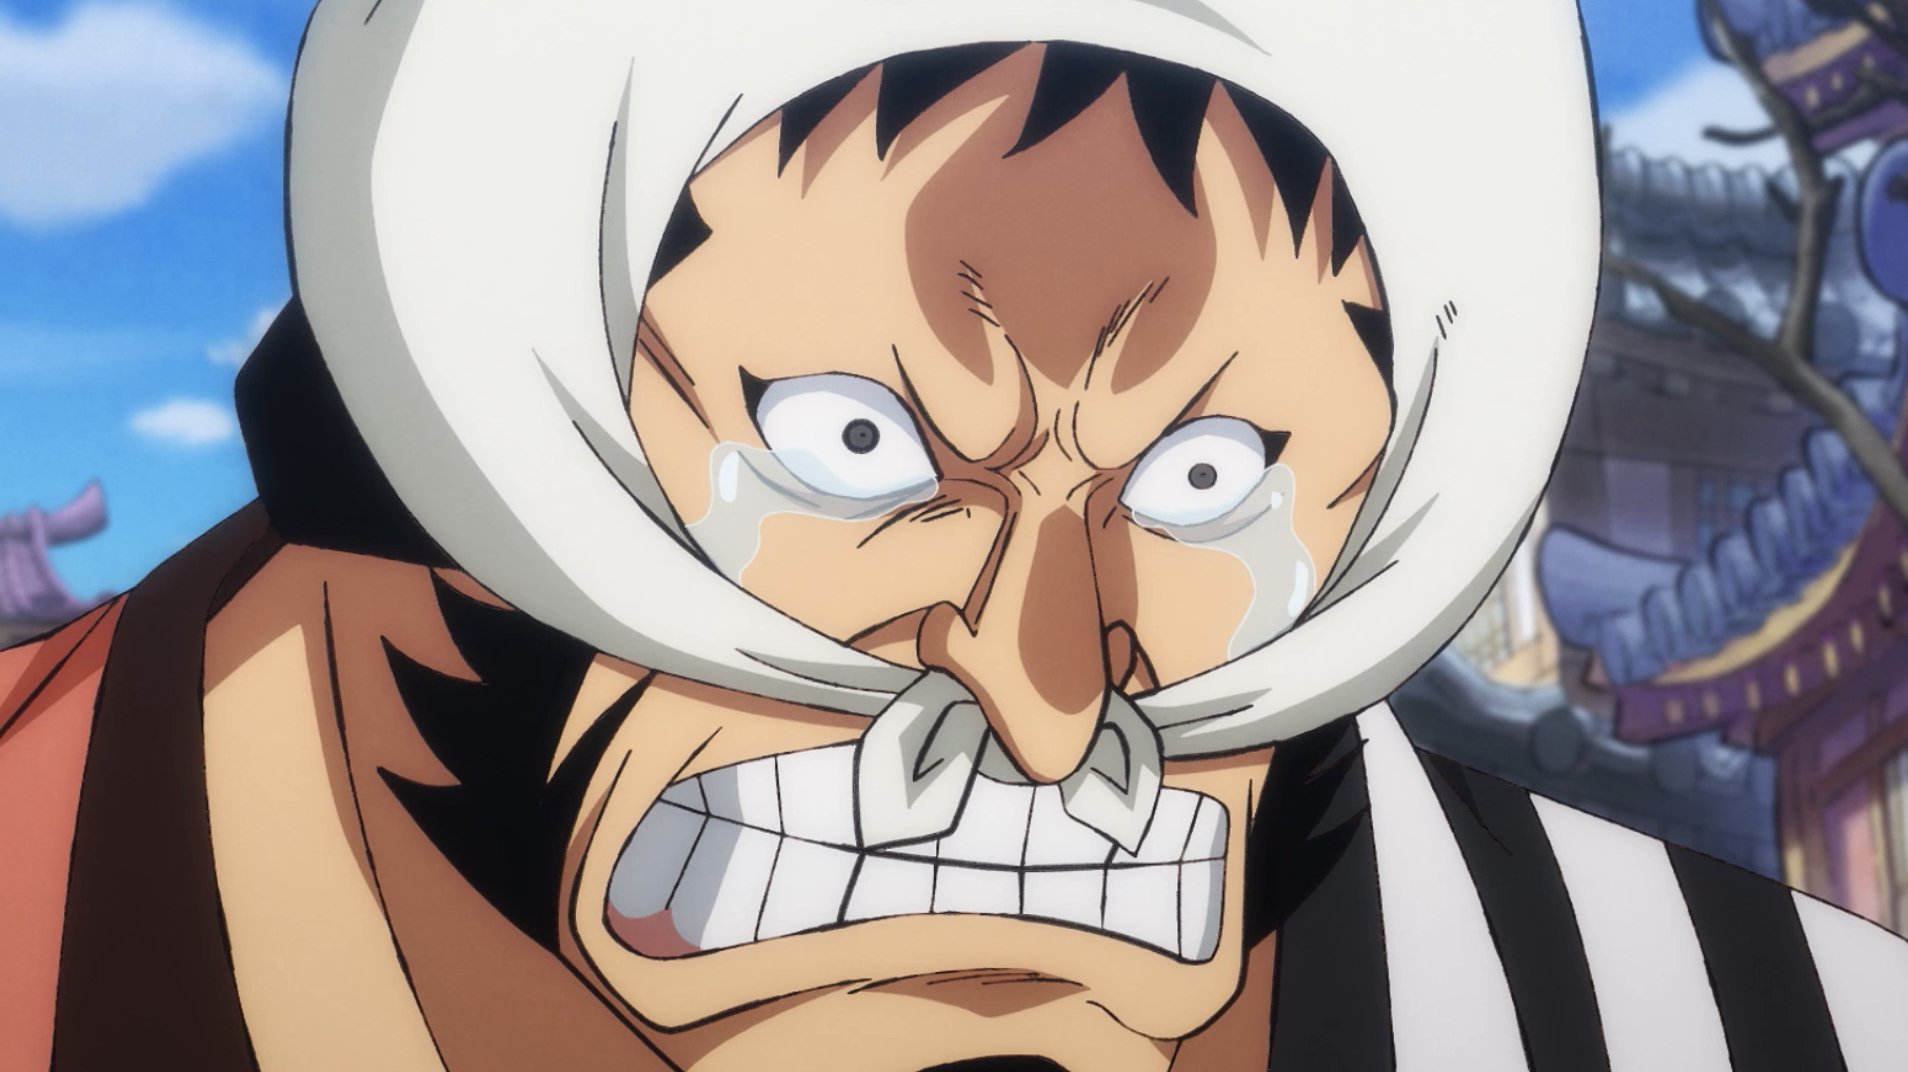 Toei Animation Tears Were Flowing In Ep 940 Onepiece T Co Mi6bxv5vky Twitter